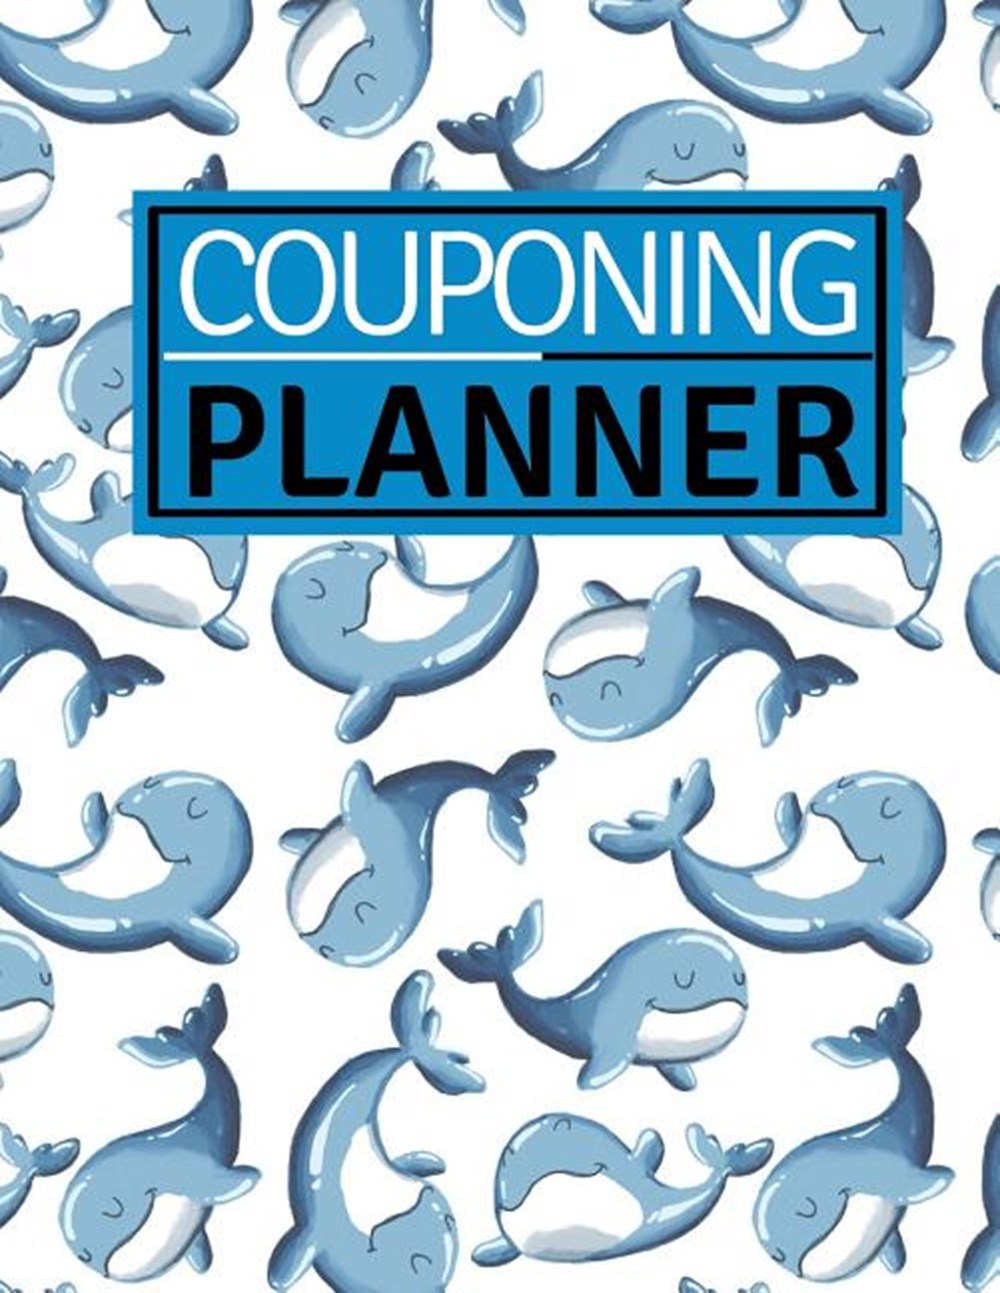 Couponing Planner Couponing Book Organizer w/ Cute Adorable Blue Whale Fish in White Cover Gift